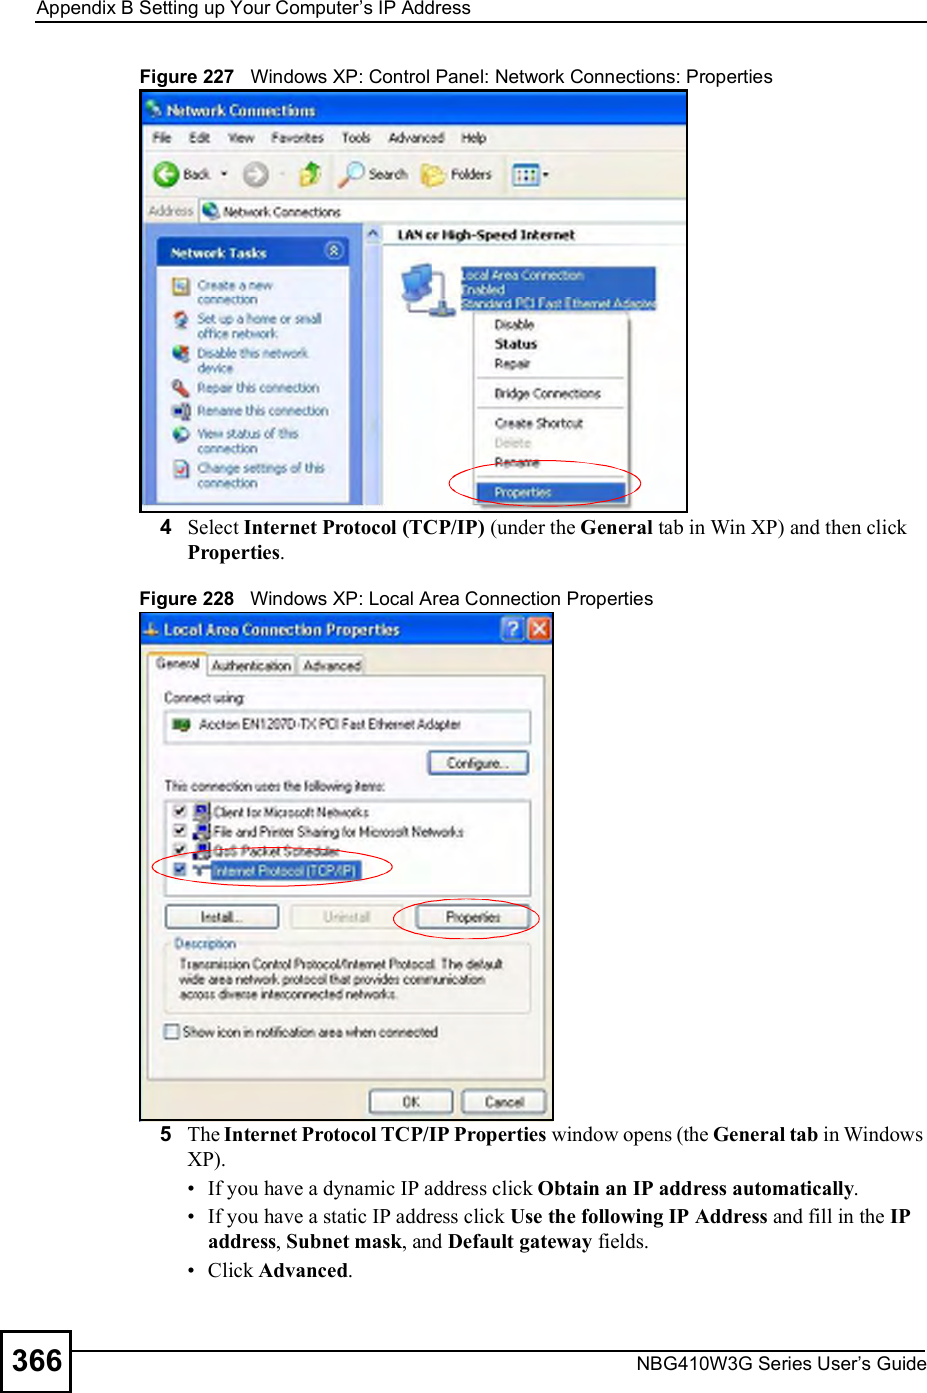 Appendix BSetting up Your Computer s IP AddressNBG410W3G Series User s Guide366Figure 227   Windows XP: Control Panel: Network Connections: Properties4Select Internet Protocol (TCP/IP) (under the General tab in Win XP) and then click Properties.Figure 228   Windows XP: Local Area Connection Properties5The Internet Protocol TCP/IP Properties window opens (the General tab in Windows XP). If you have a dynamic IP address click Obtain an IP address automatically. If you have a static IP address click Use the following IP Address and fill in the IP address, Subnet mask, and Default gateway fields.  Click Advanced.